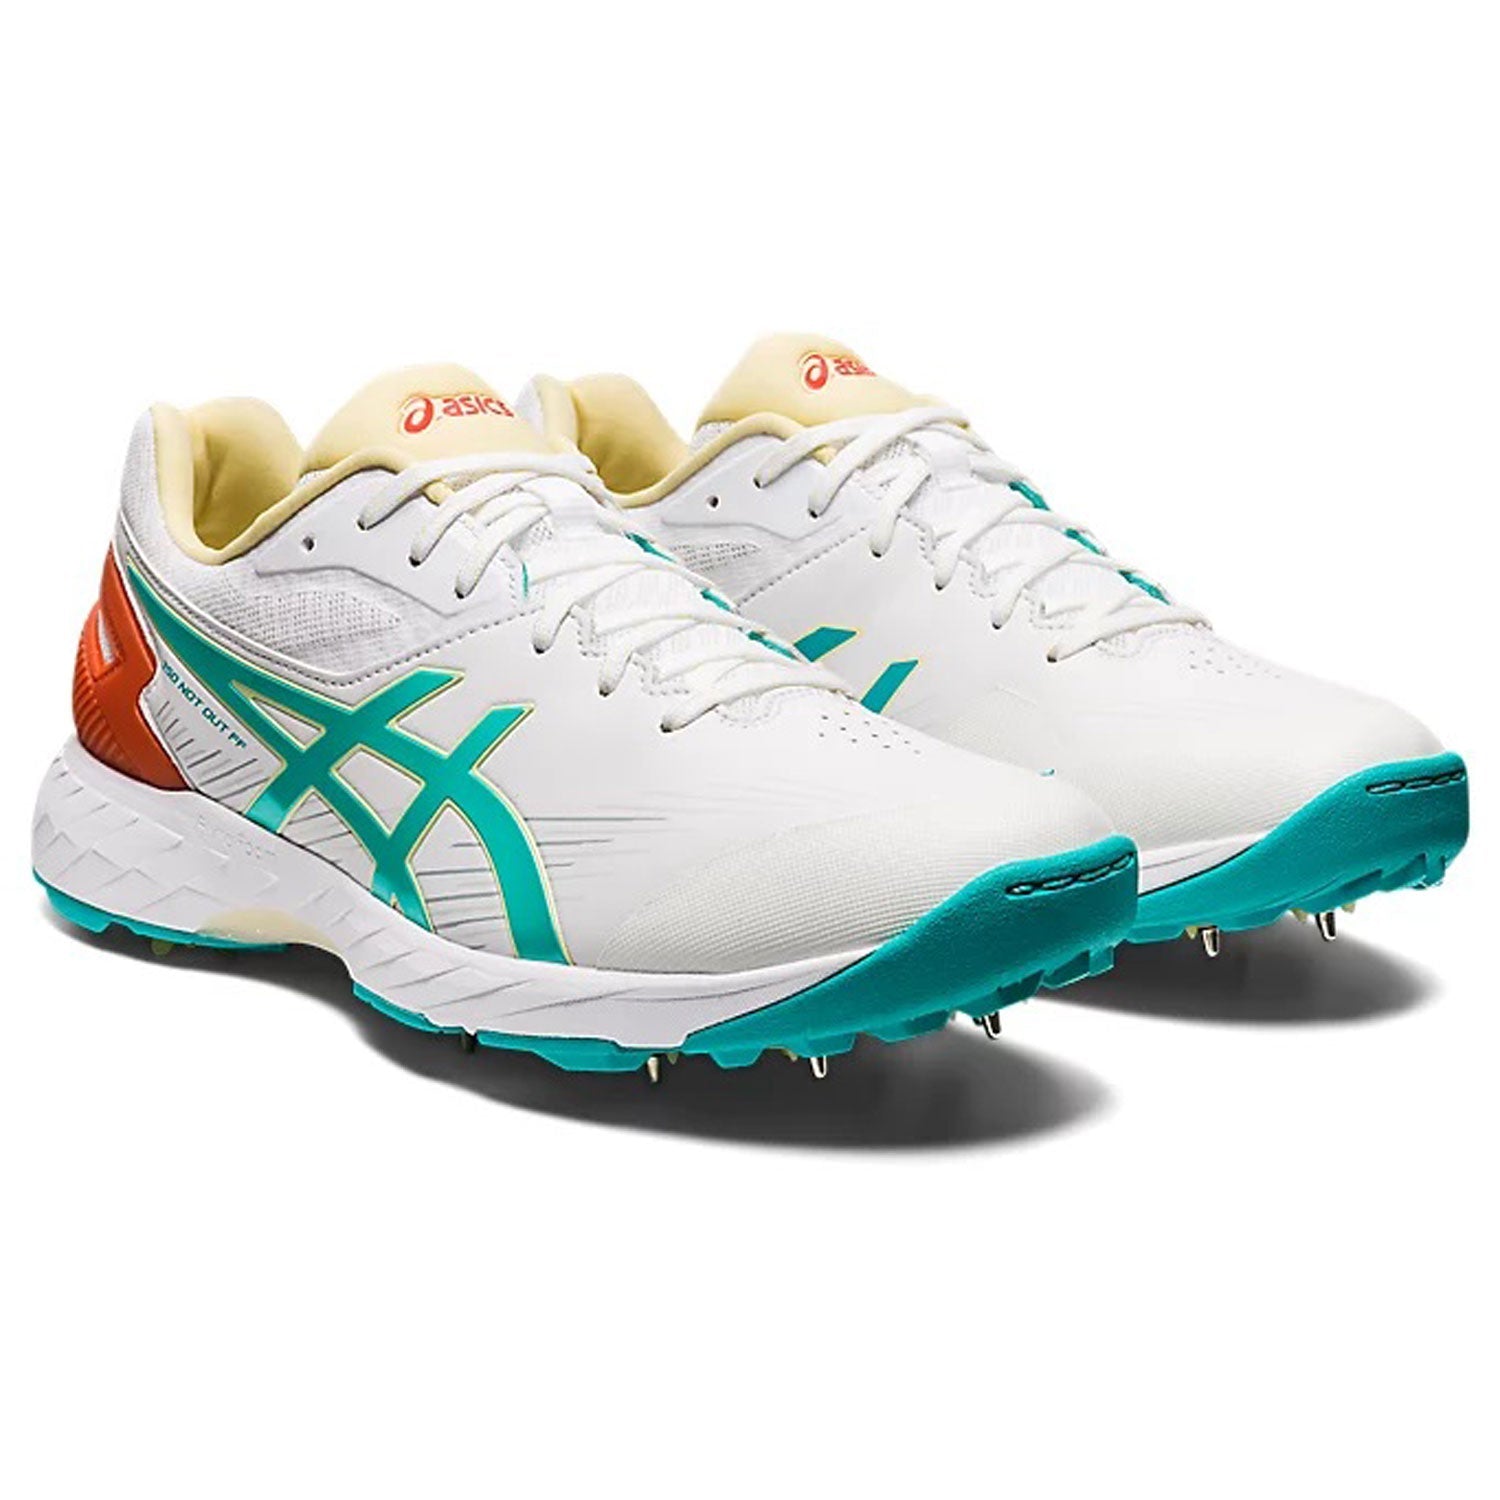 Asics Gel 350 Not Out Cricket Spikes Womens Fit - The Cricket Warehouse